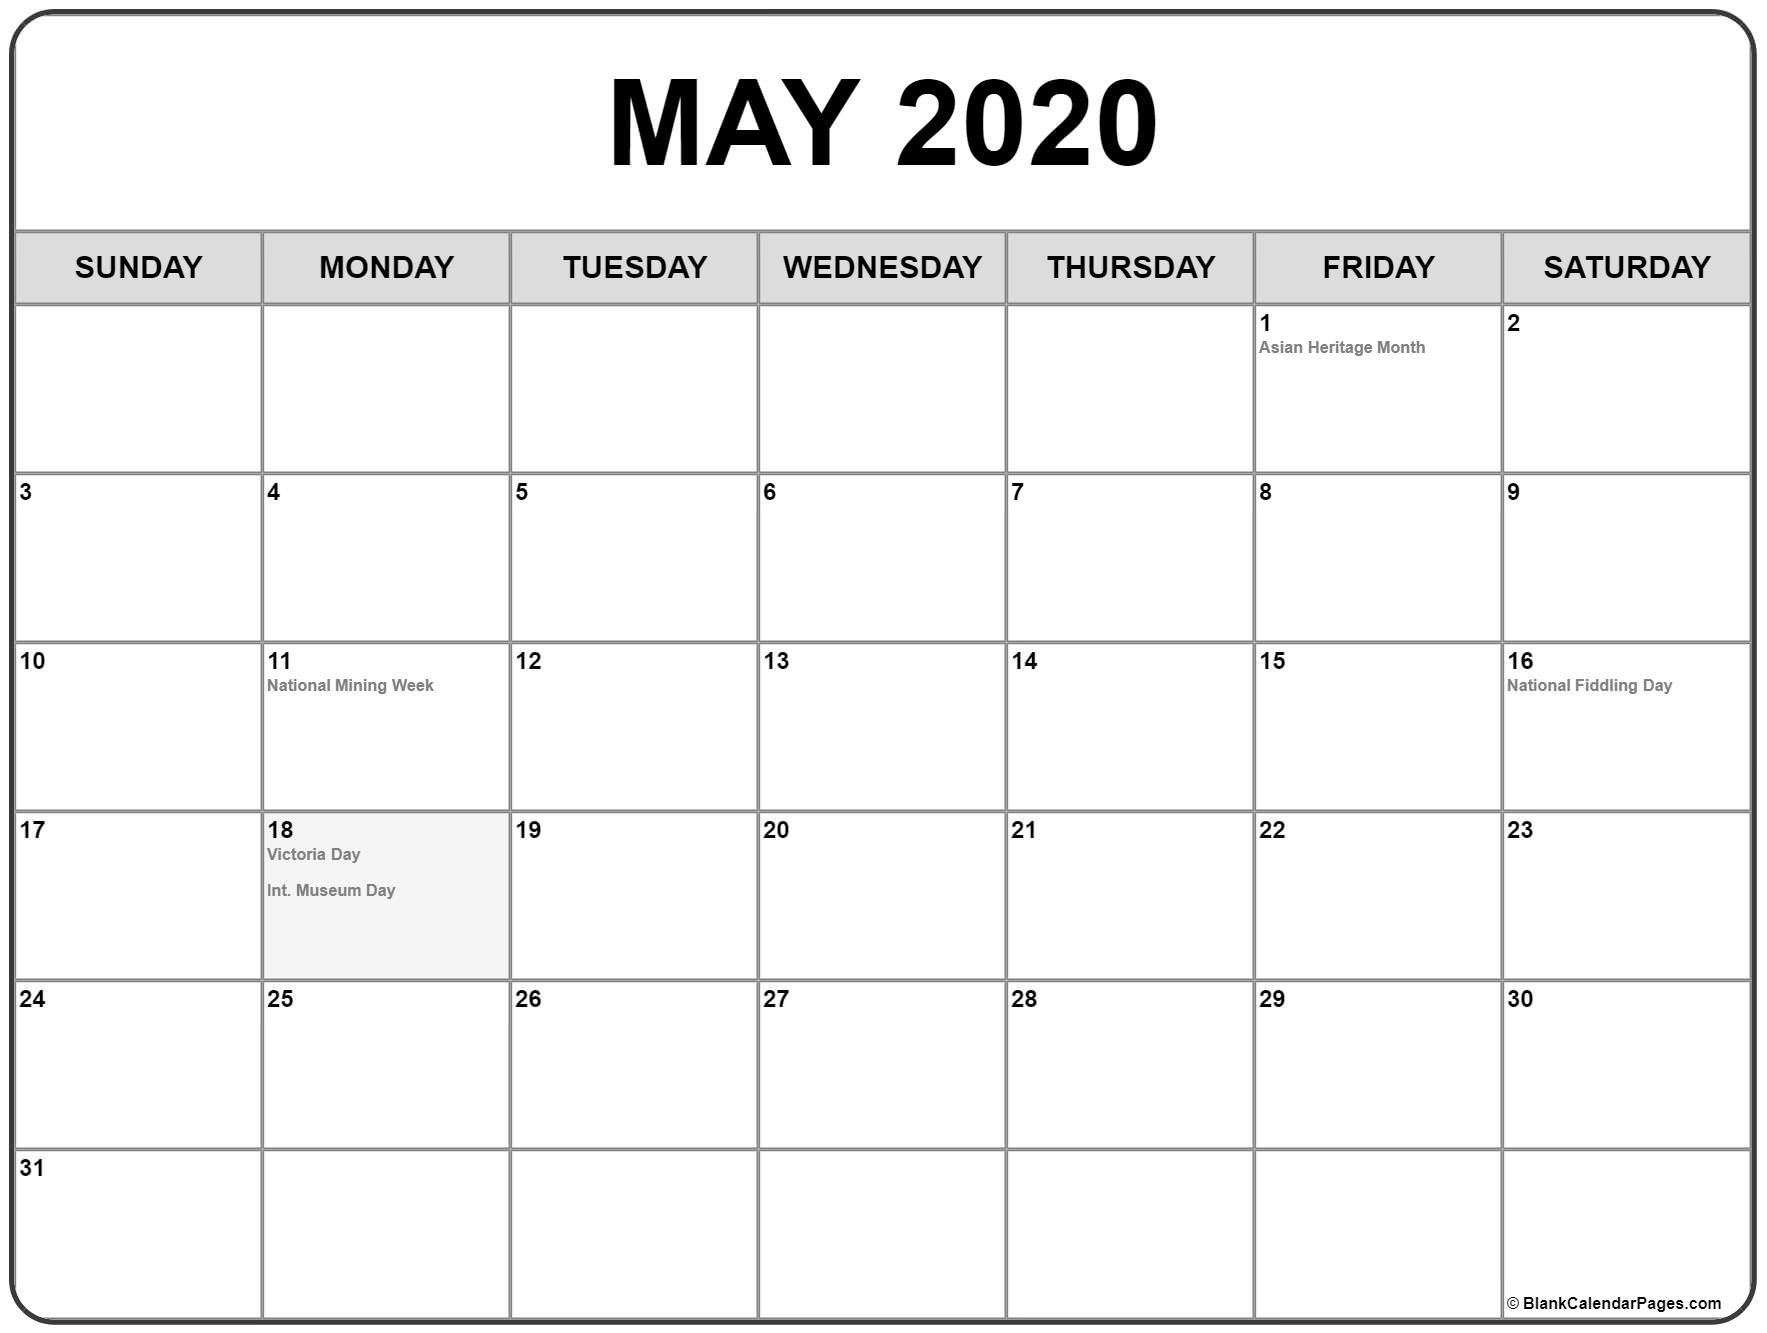 Collection of May 2020 calendars with holidays